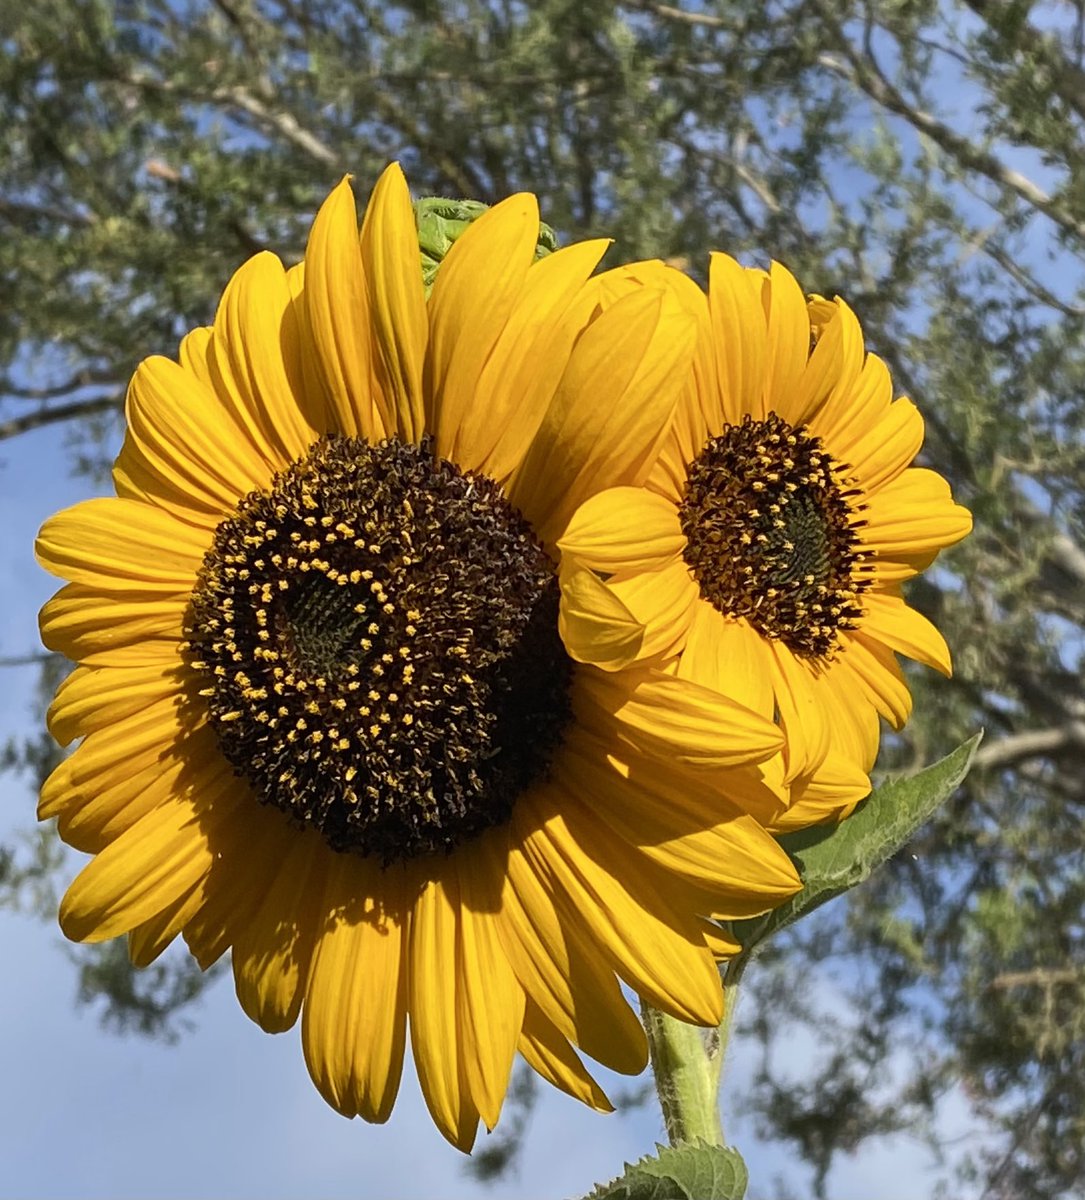 Double blooms on my #sunflowers 🌻 make me so happy! #flowers #gardening